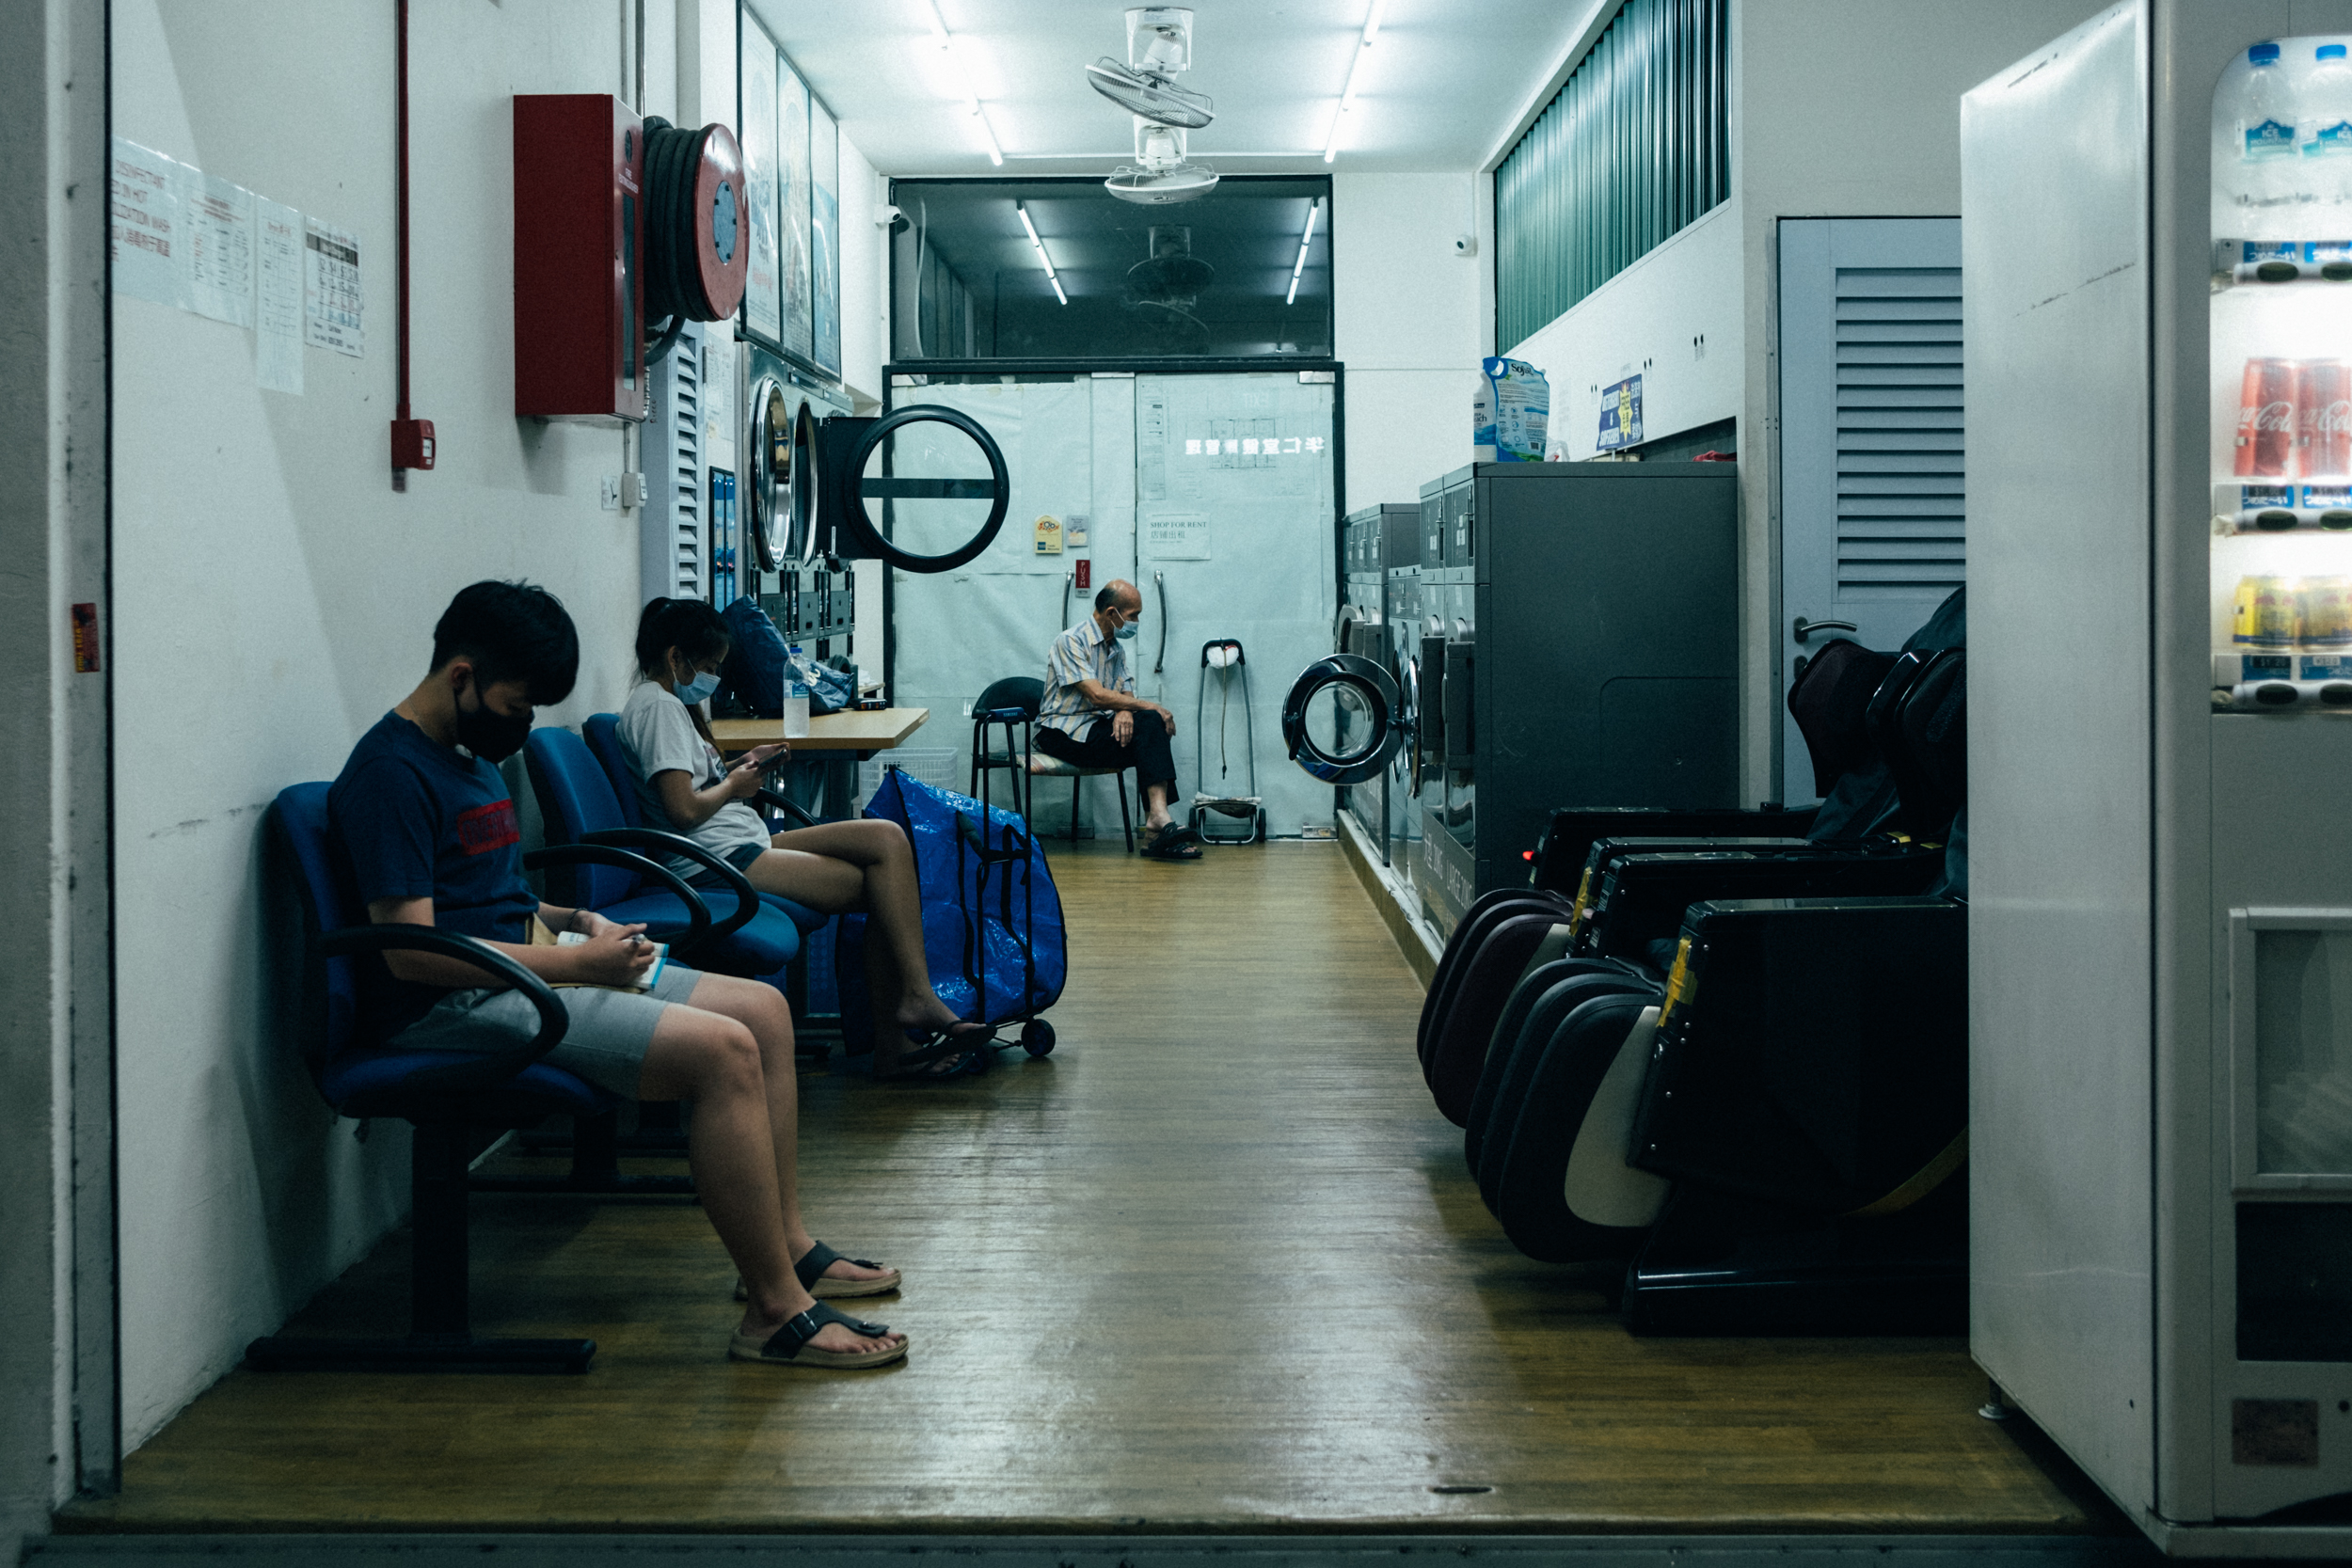 Image of people sitting in a laundromat